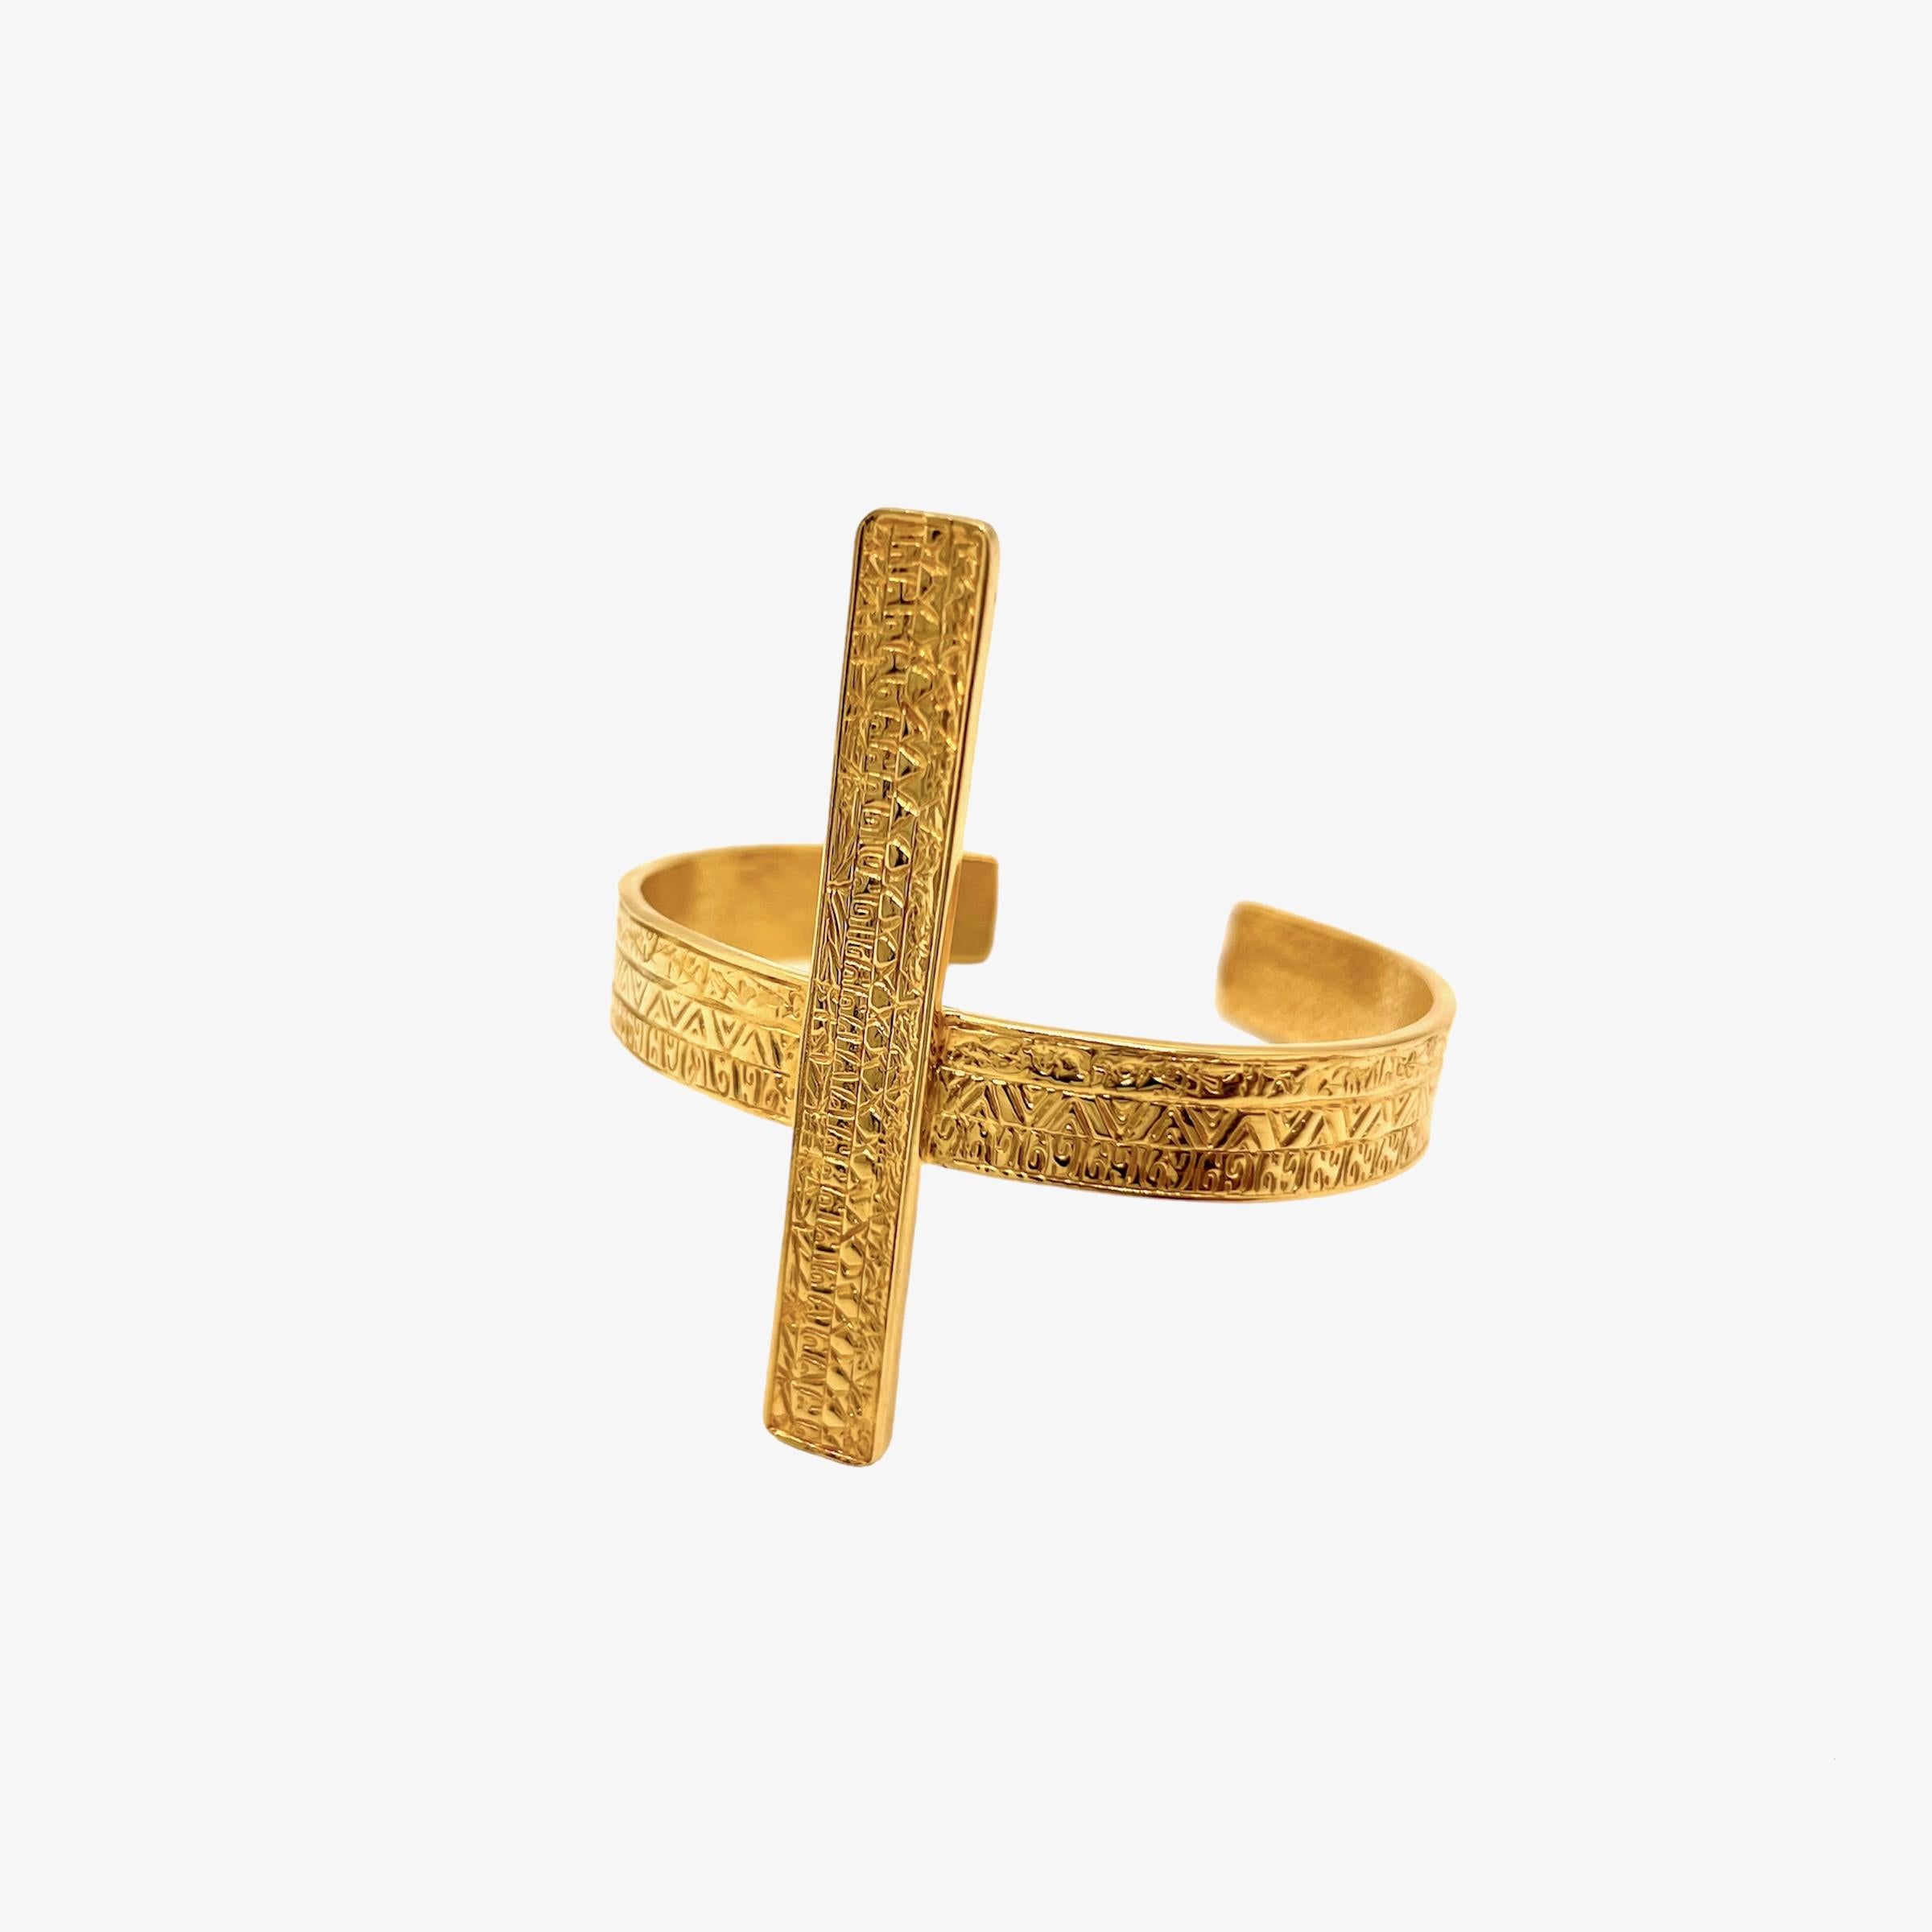 Menkaura Bracelet in 14k Yellow Gold: Ancient Symbolic Elegance For Sale 3